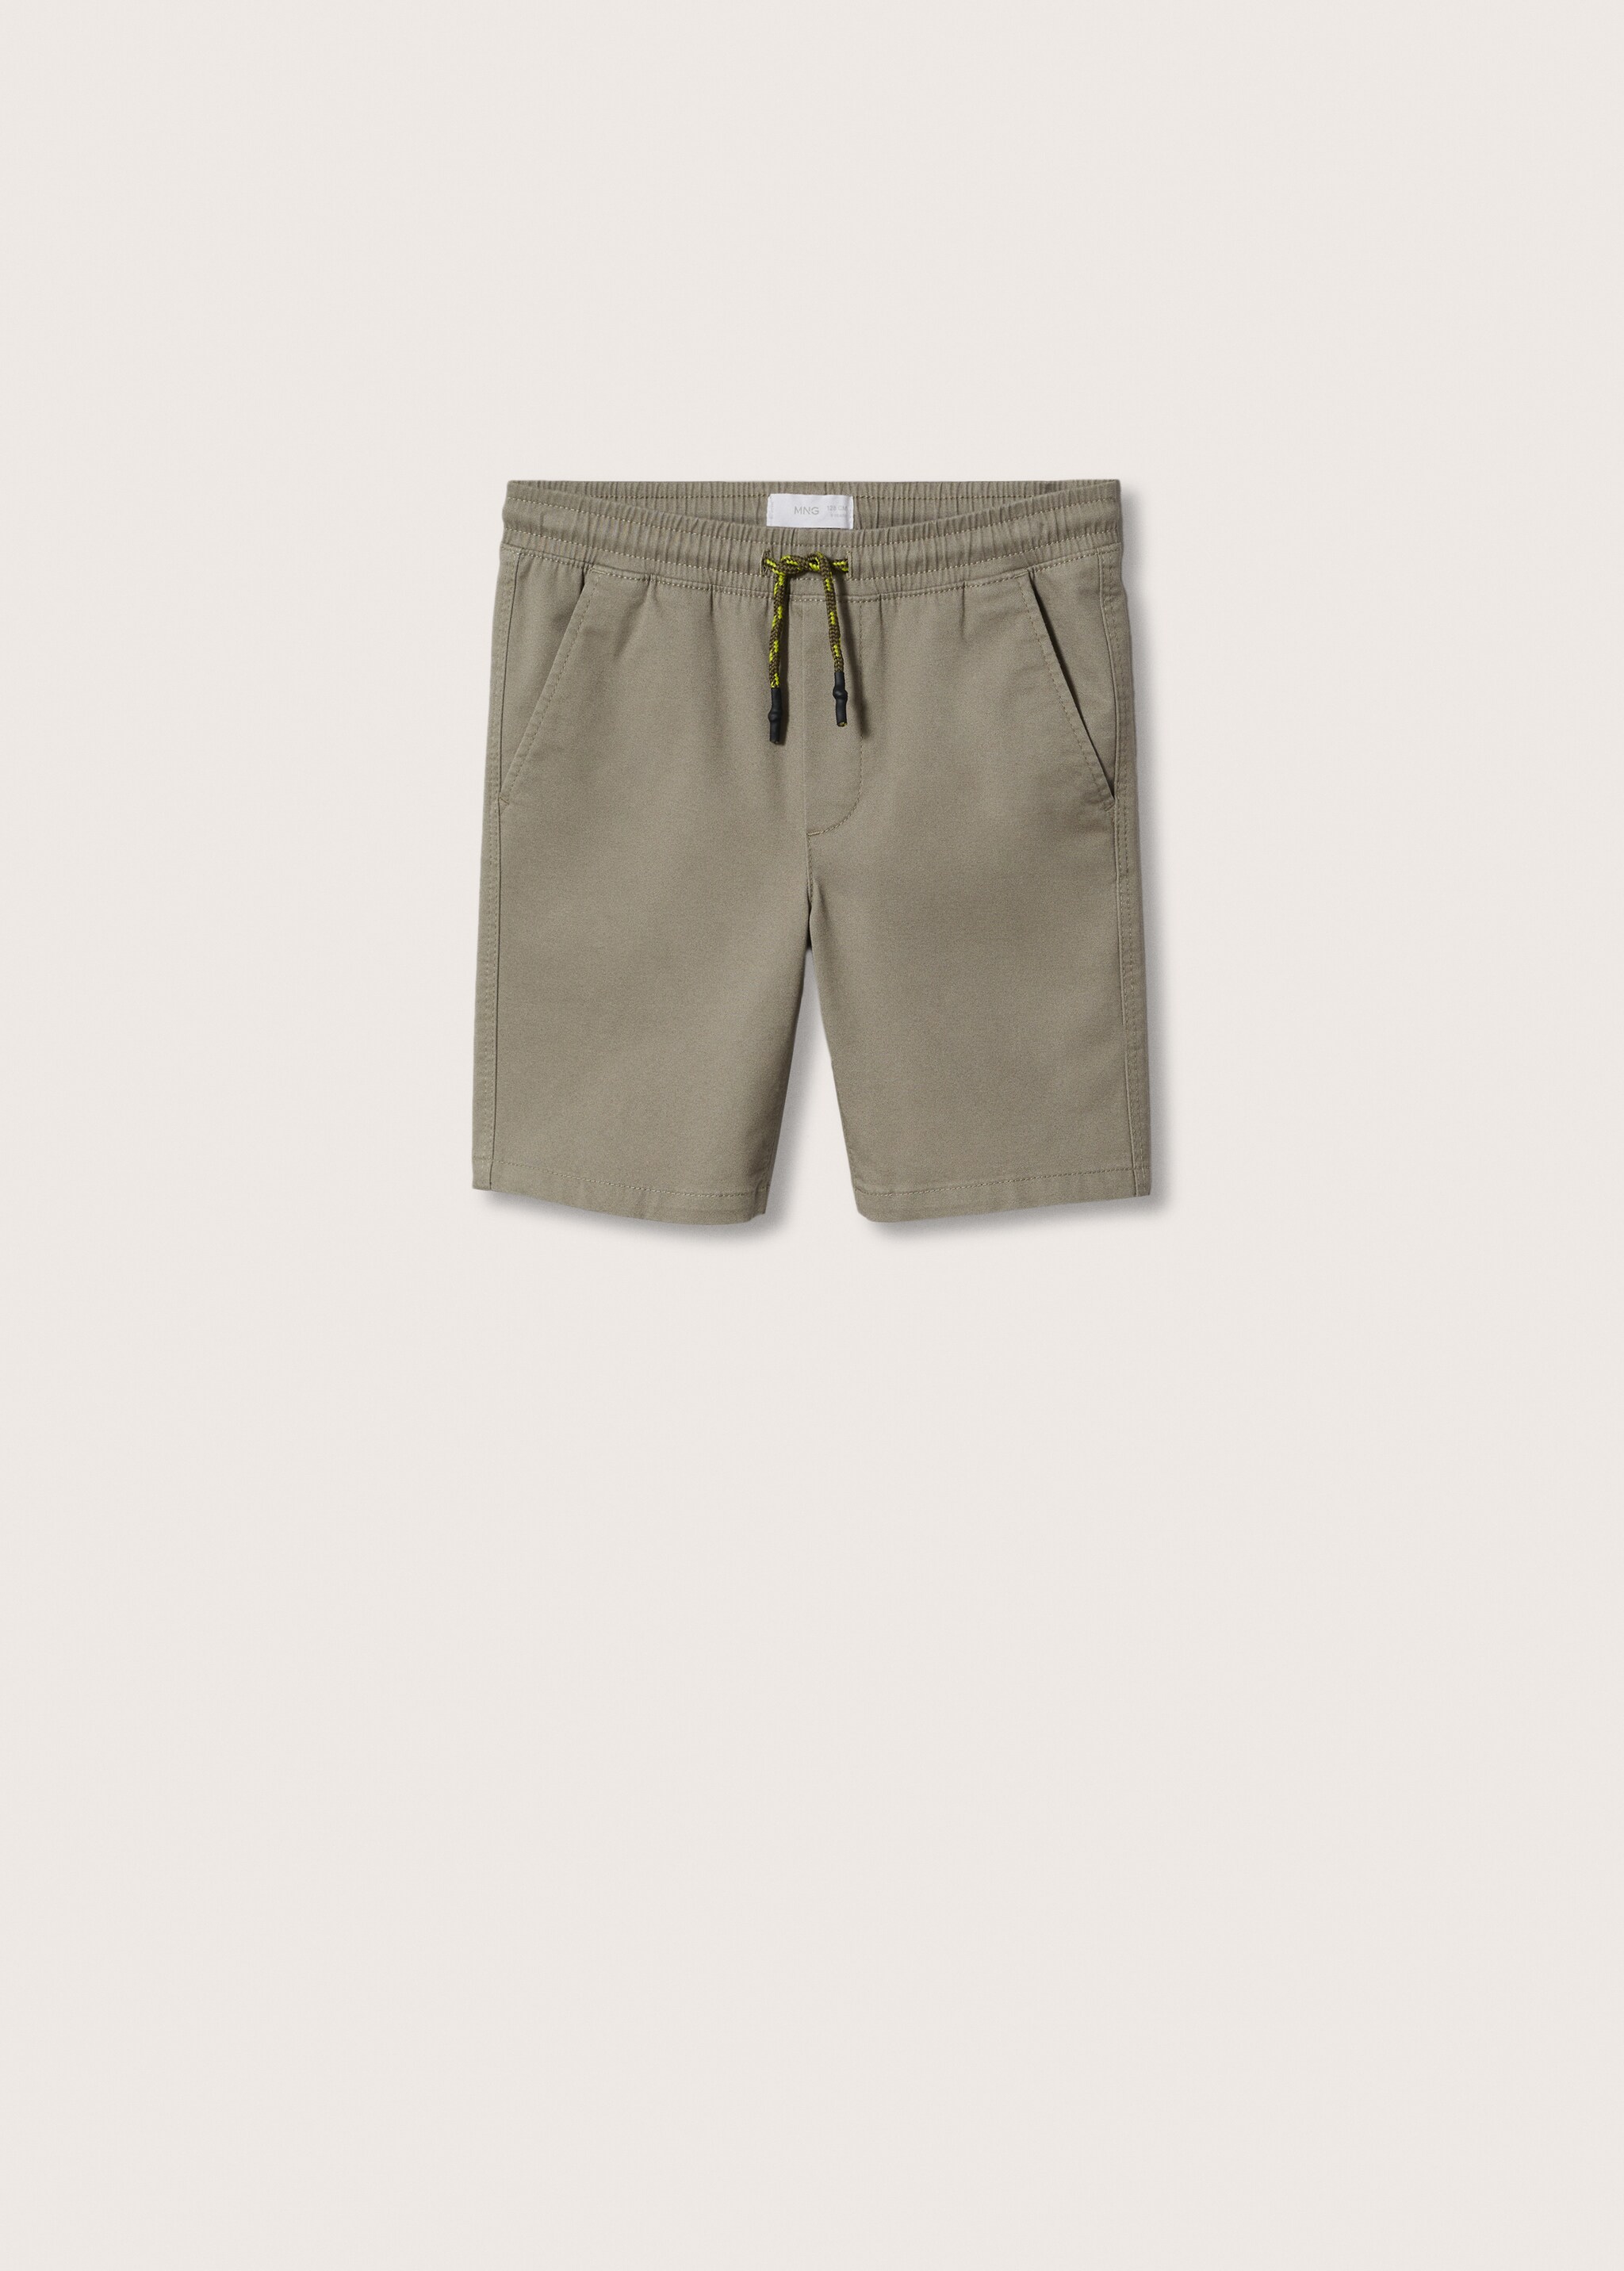 Cotton shorts with drawstring - Article without model